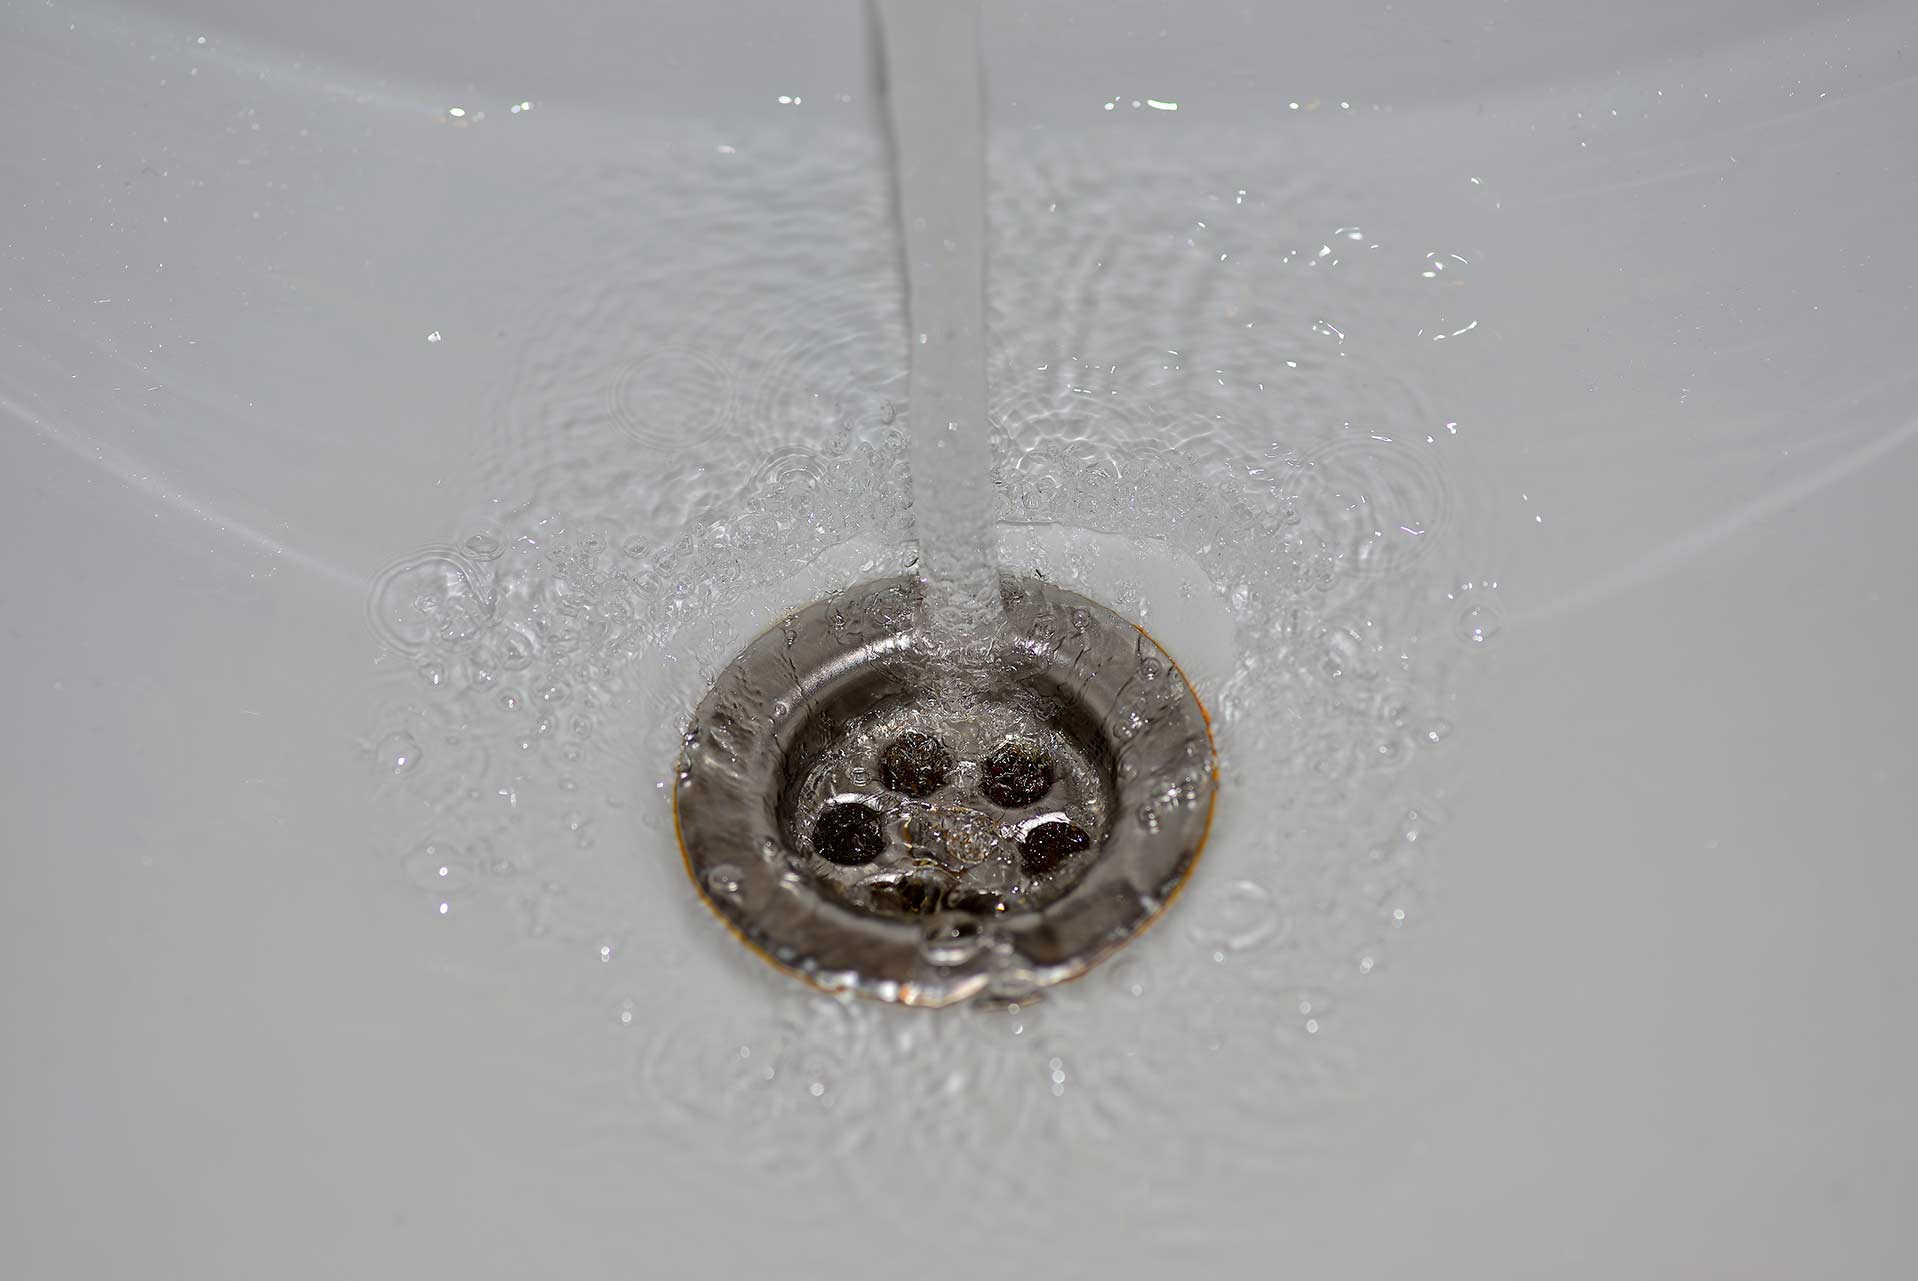 A2B Drains provides services to unblock blocked sinks and drains for properties in Wembley.